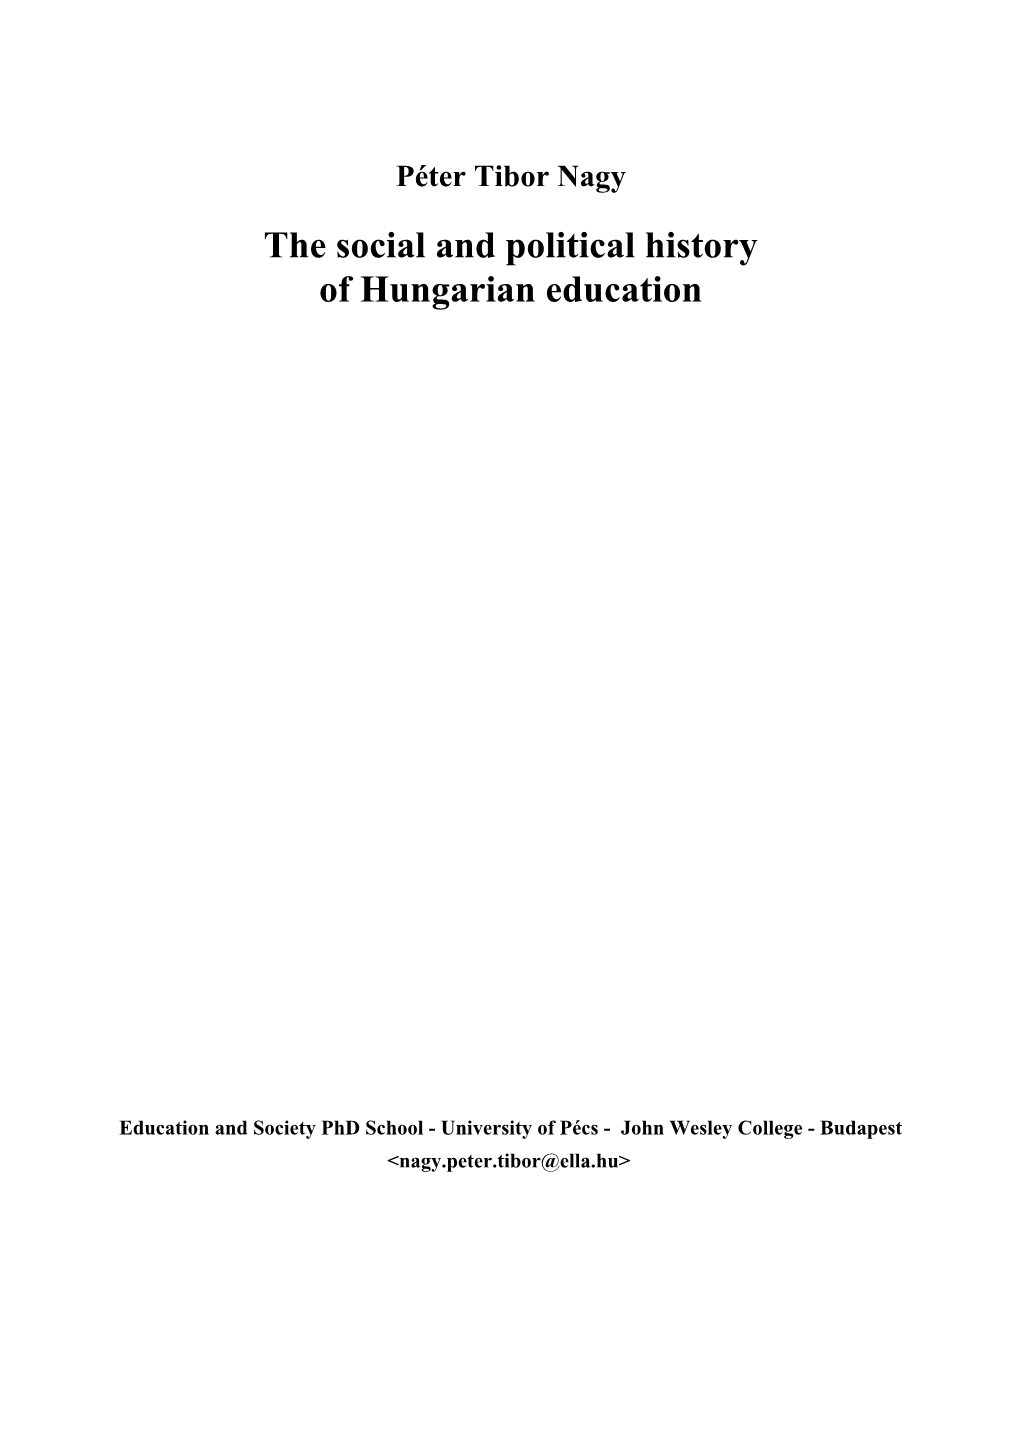 The Social and Political History of Hungarian Education